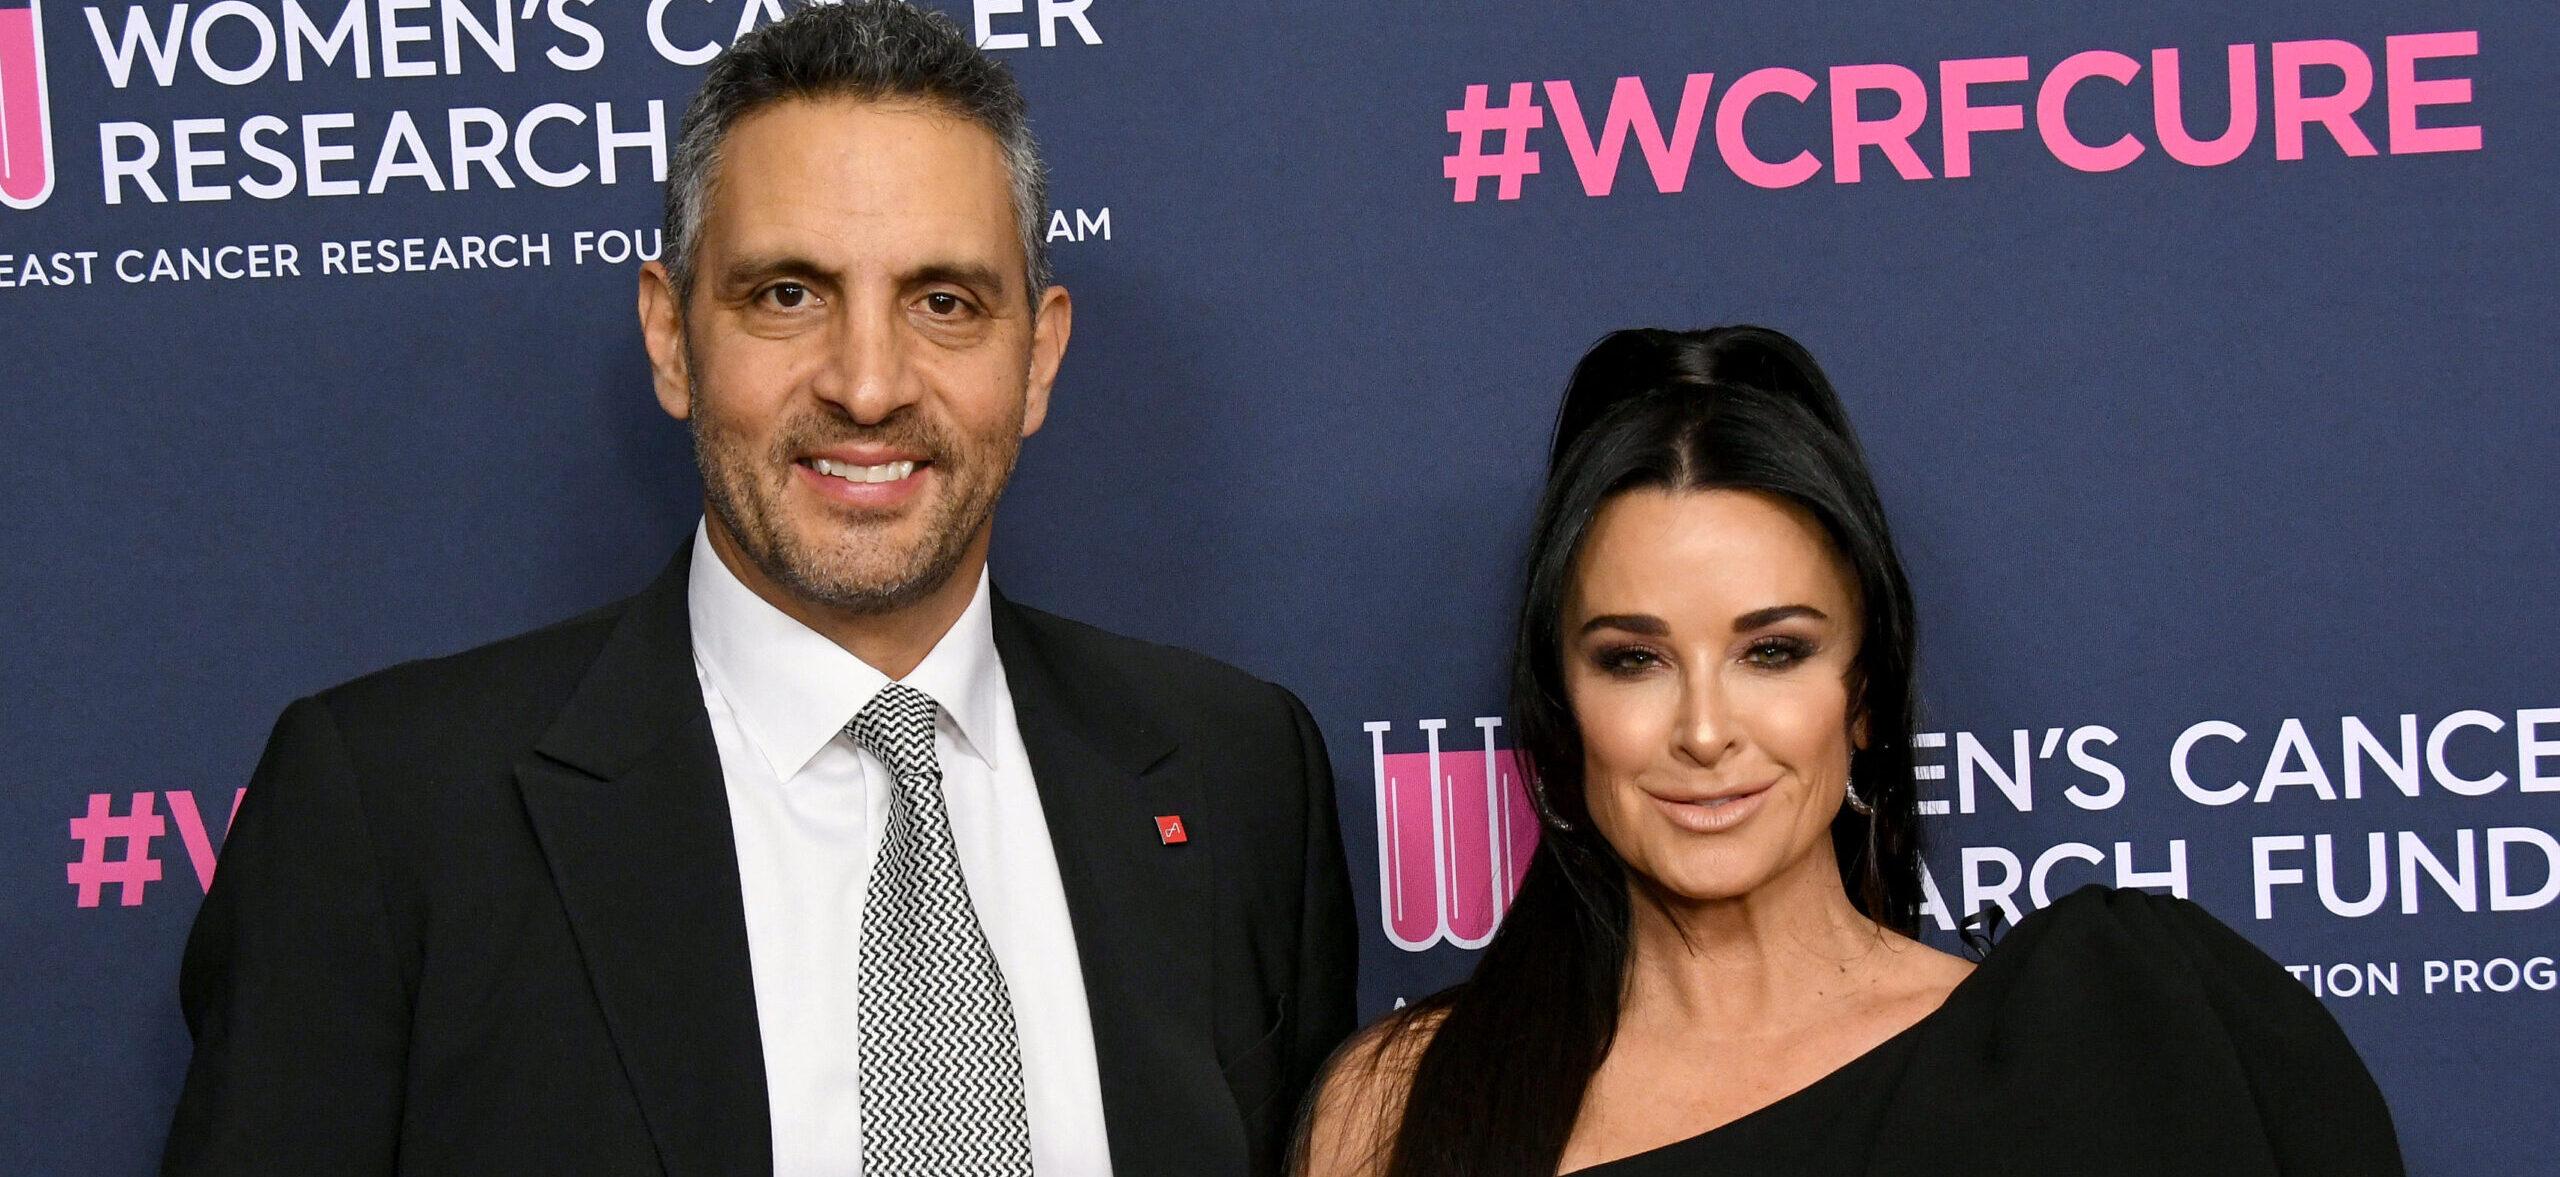 Mauricio Umansky Speaks On Broken Marriage To Kyle Richards: ‘We’re Fighting For This’